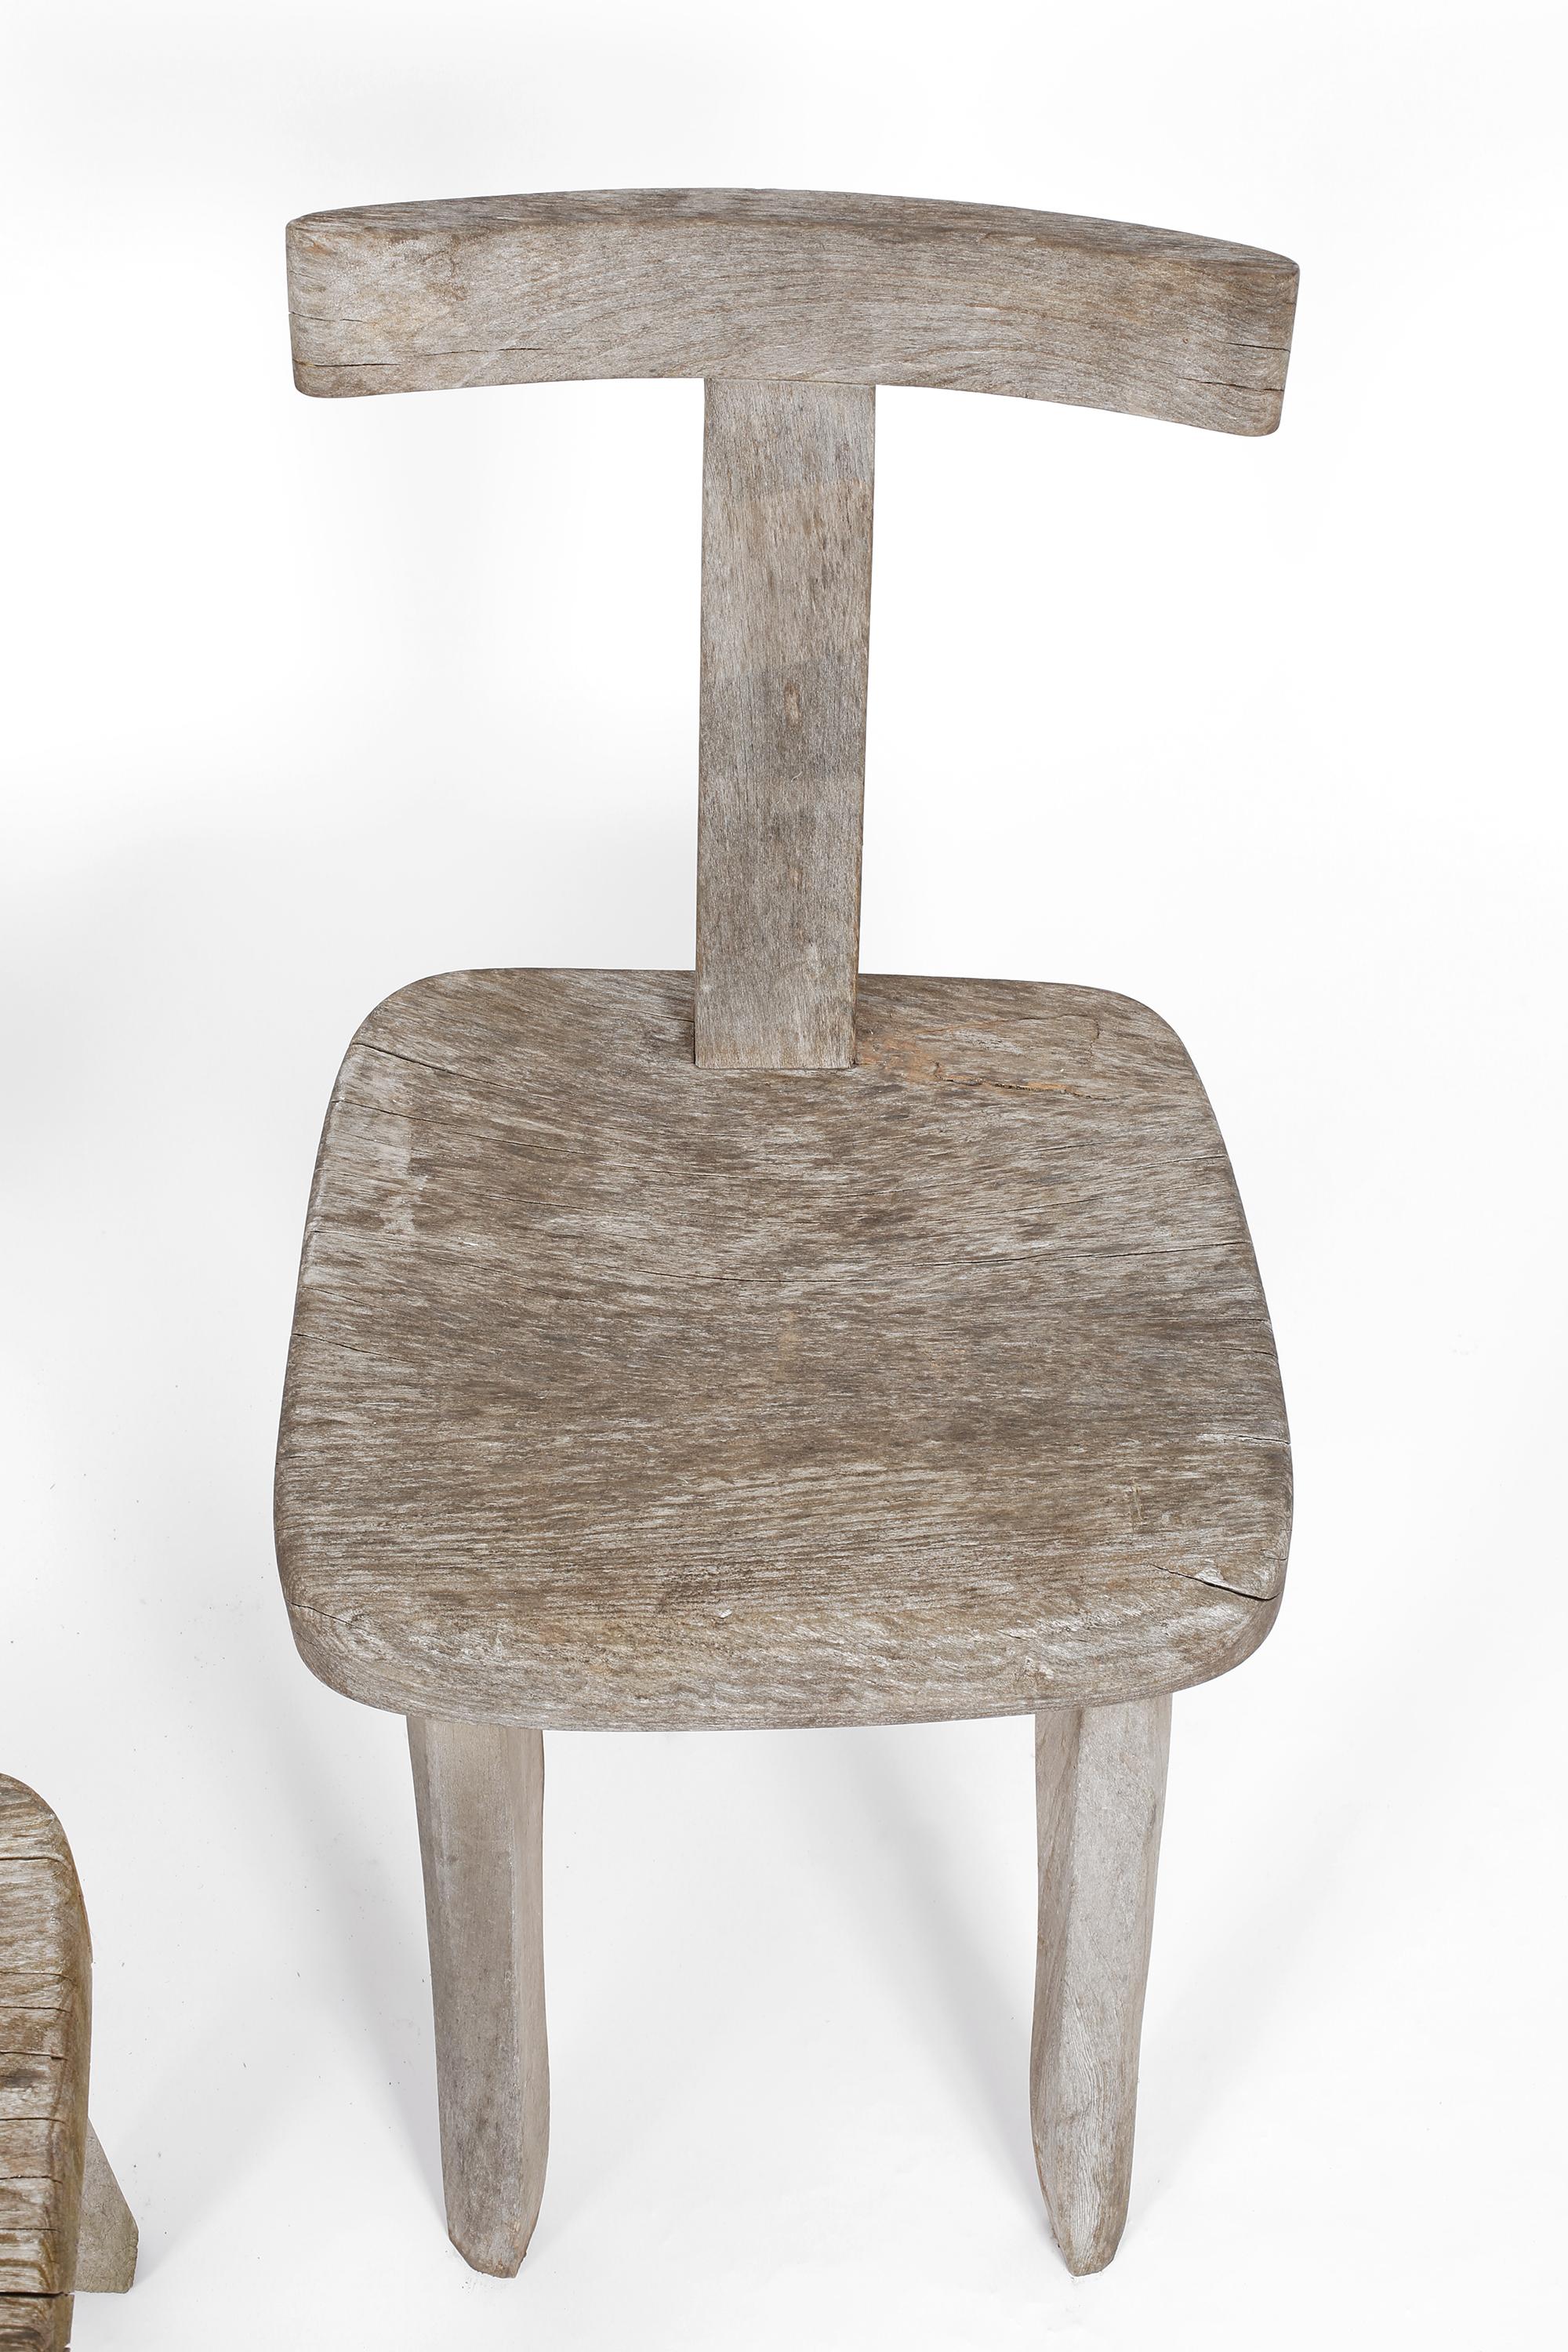 Finnish Weathered Elm T Chair attributed to Olavi Hanninen